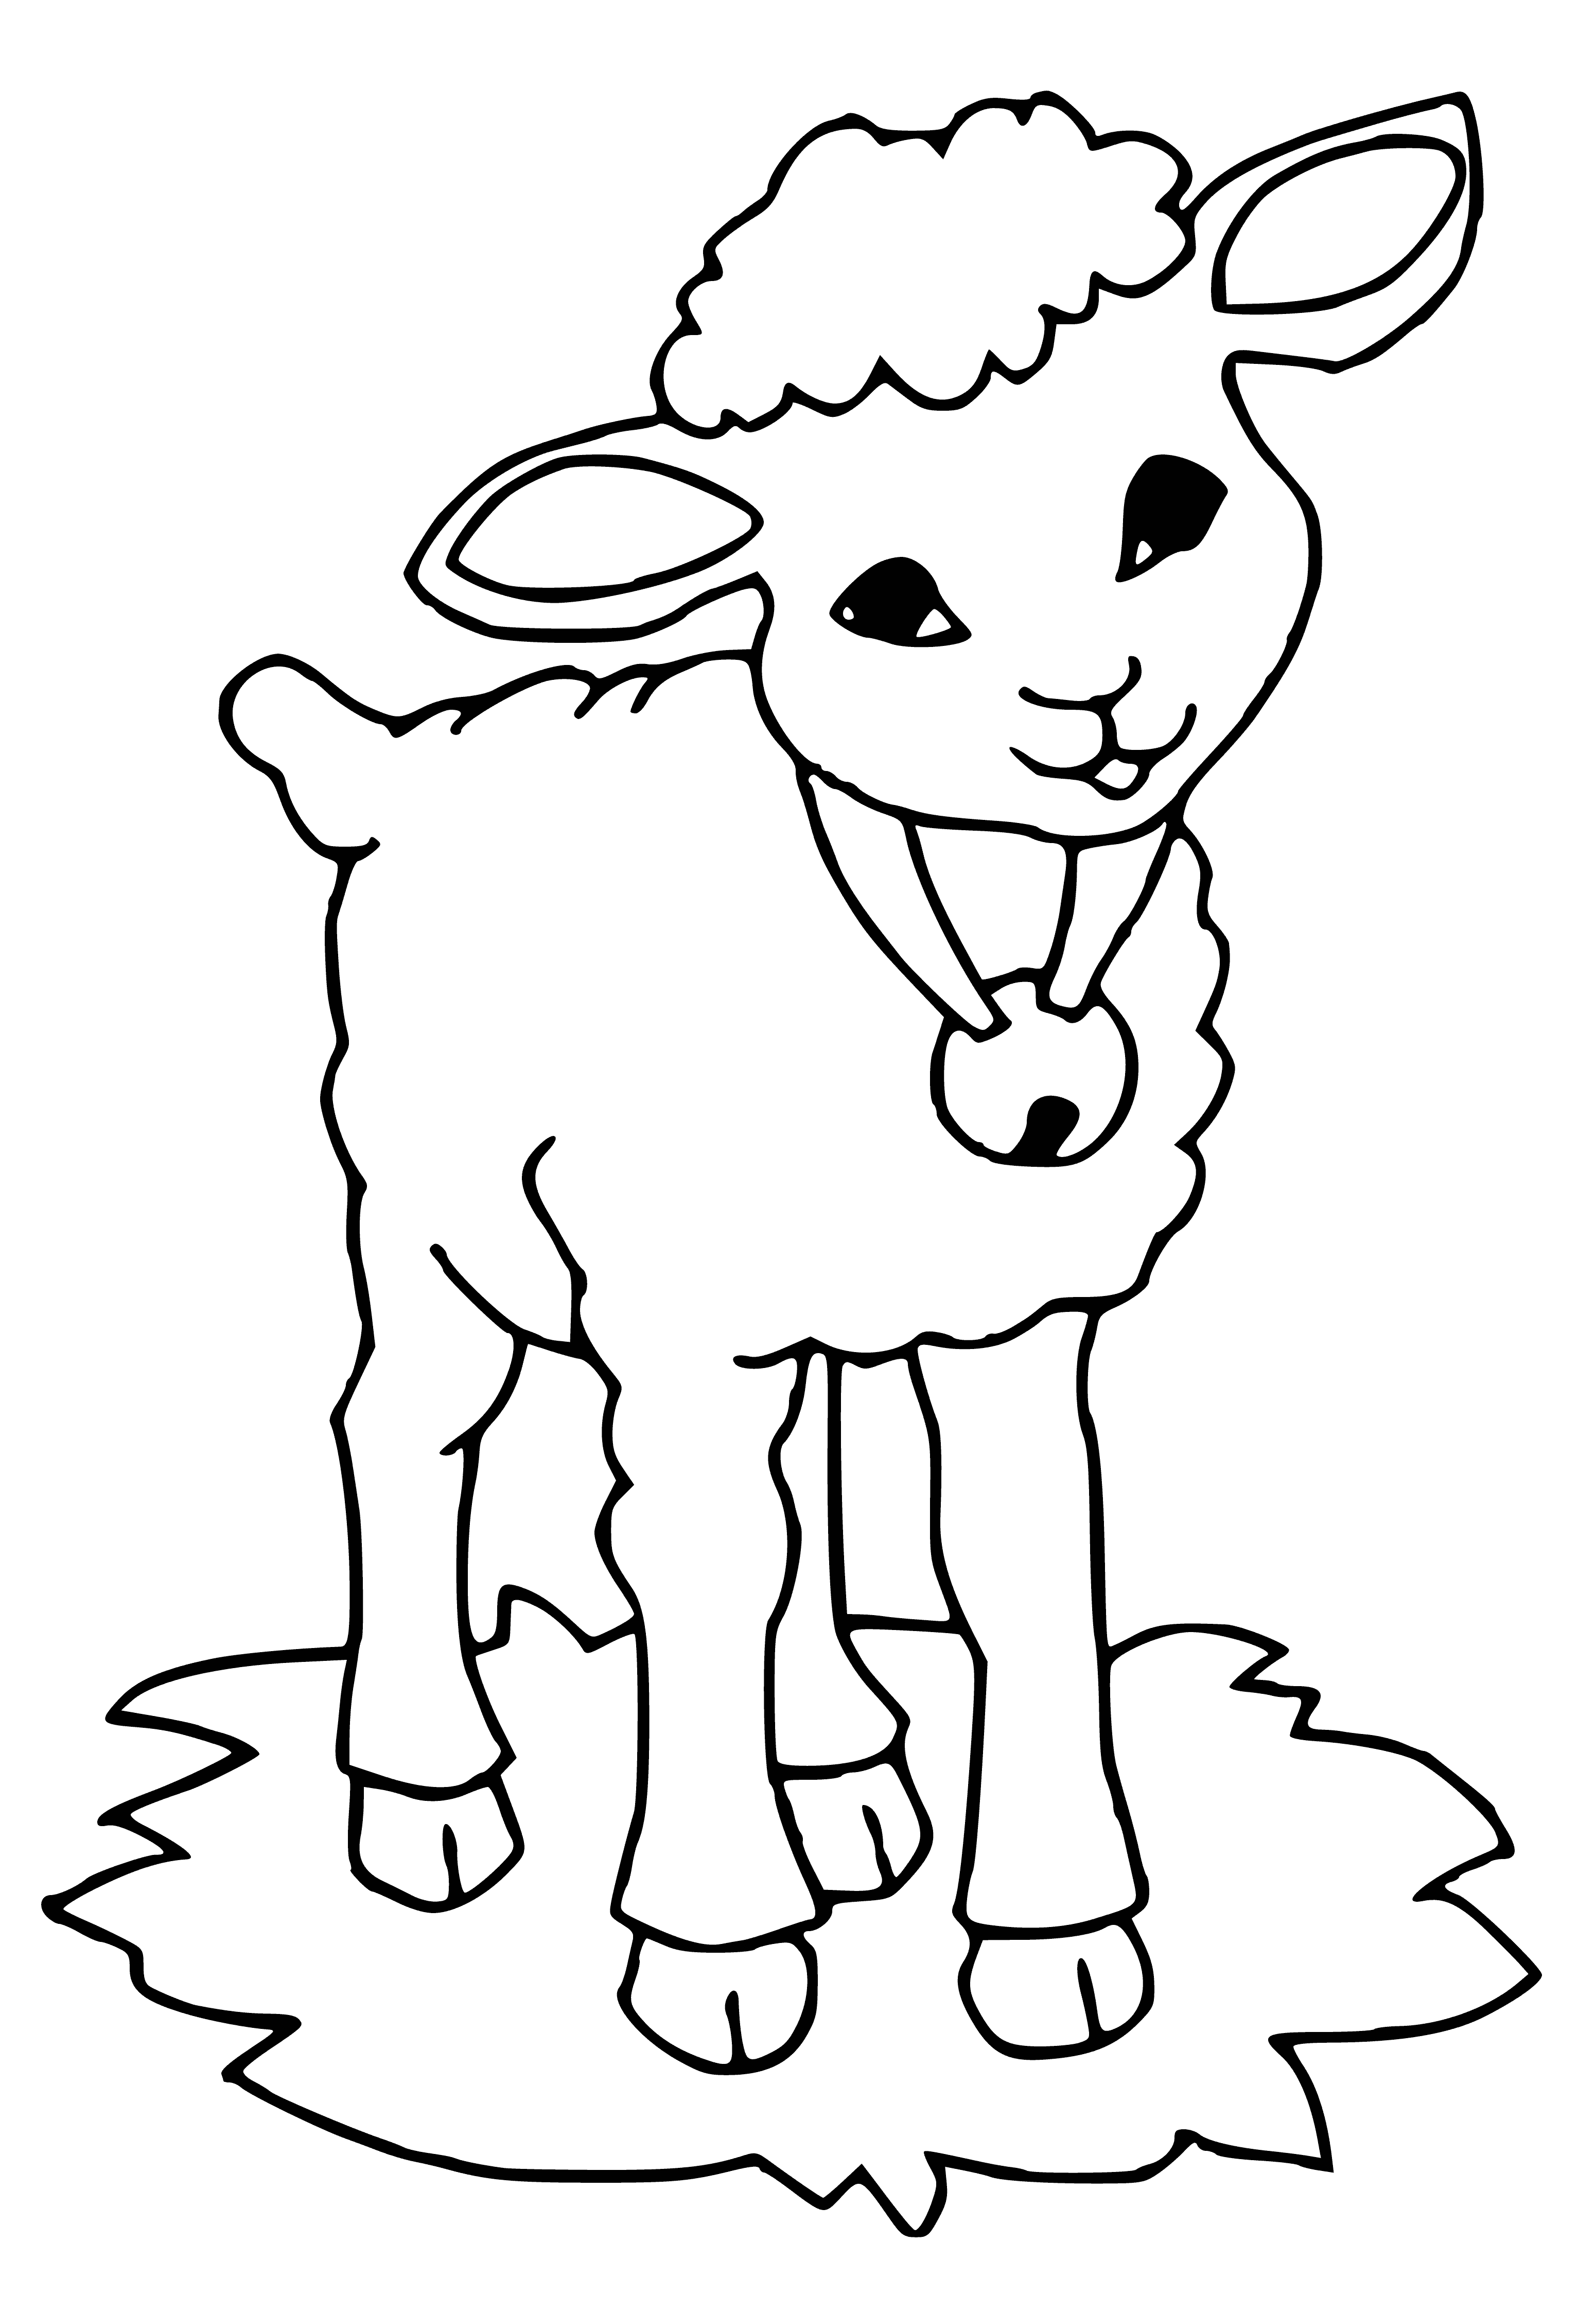 coloring page: Sheep with bell stands in grassy field, bell ringing.